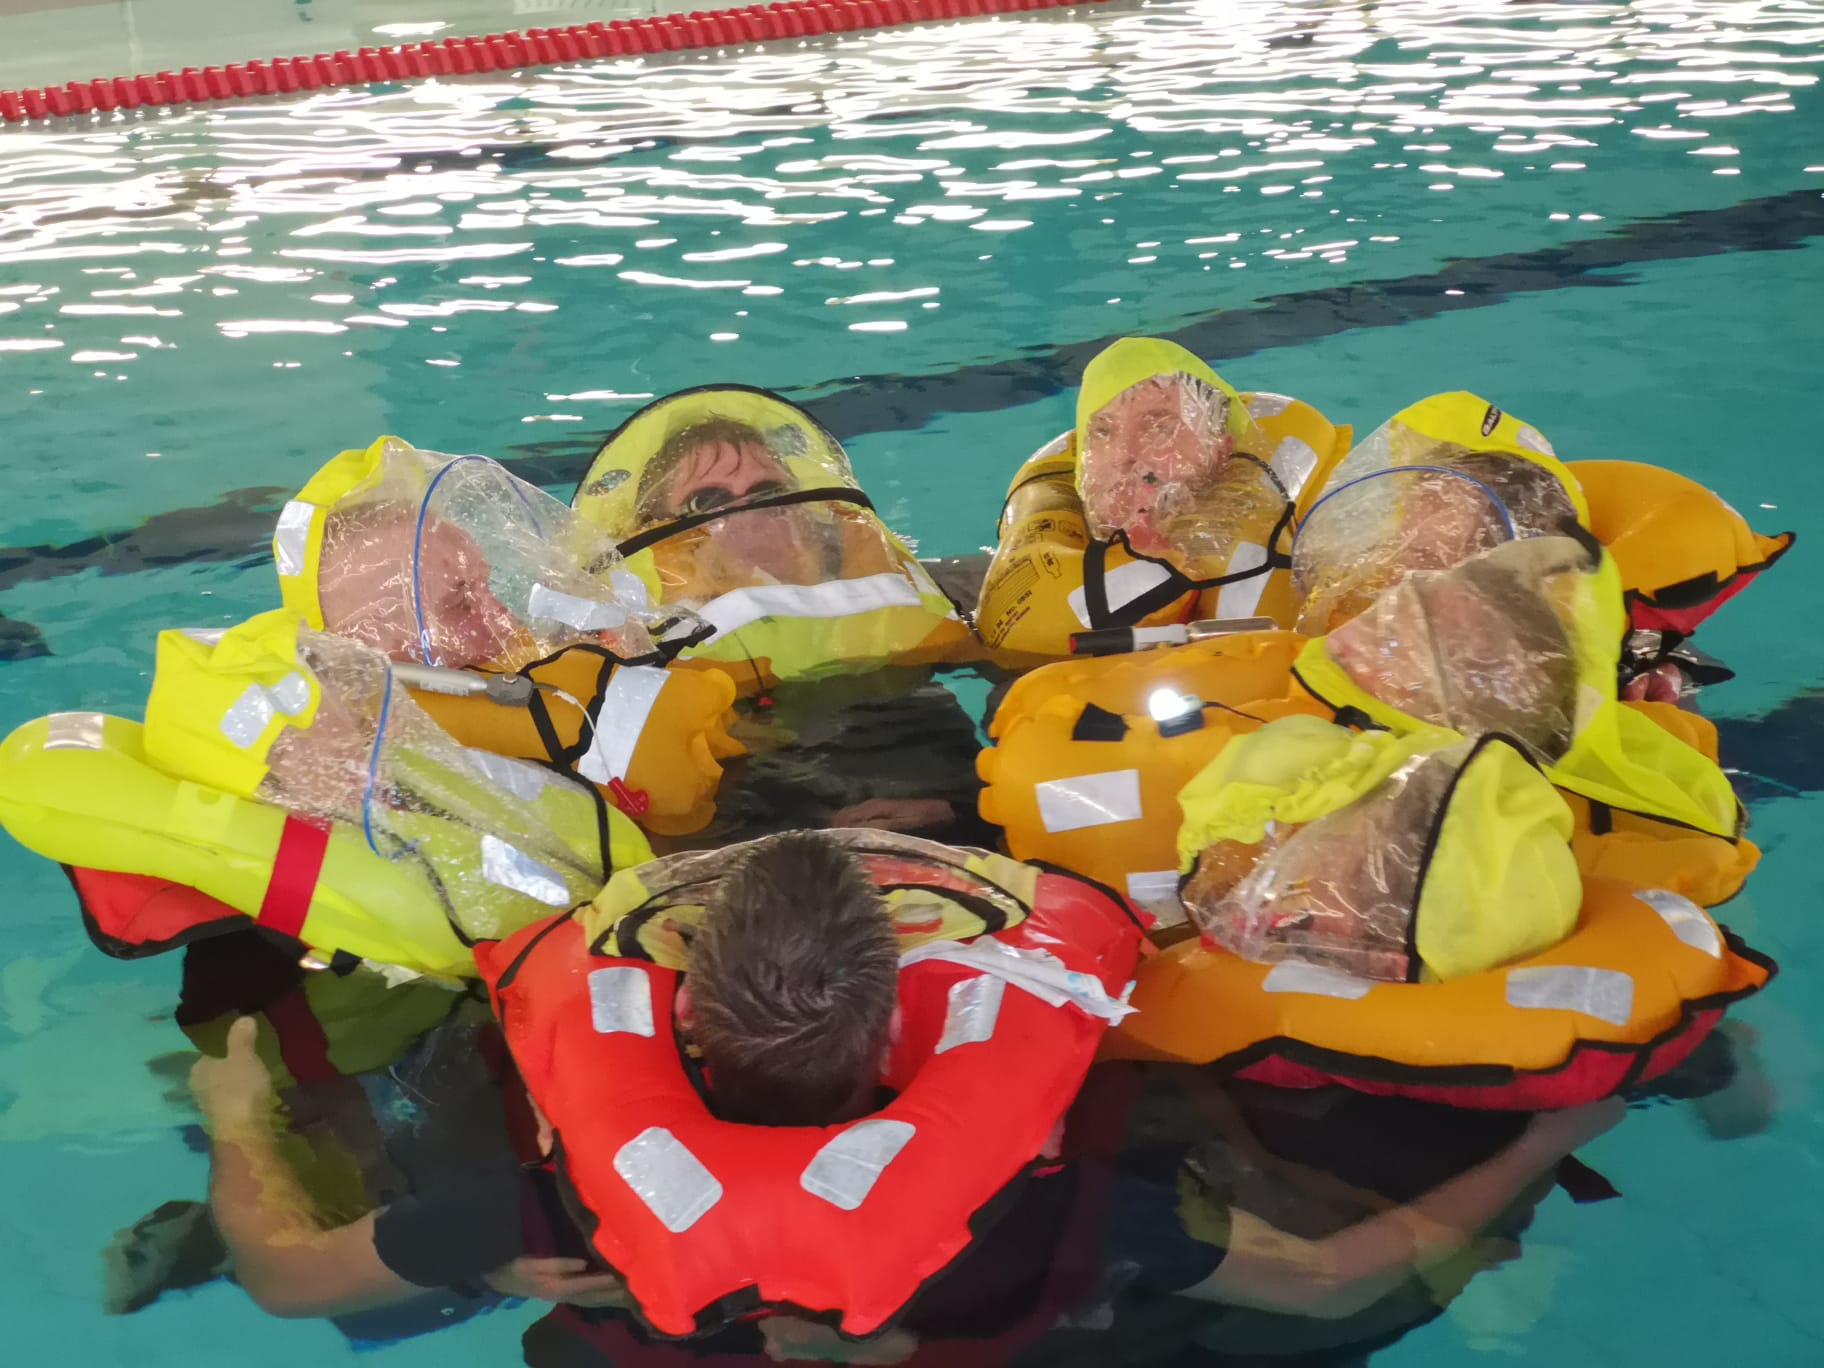 Returning to the water lifejackets